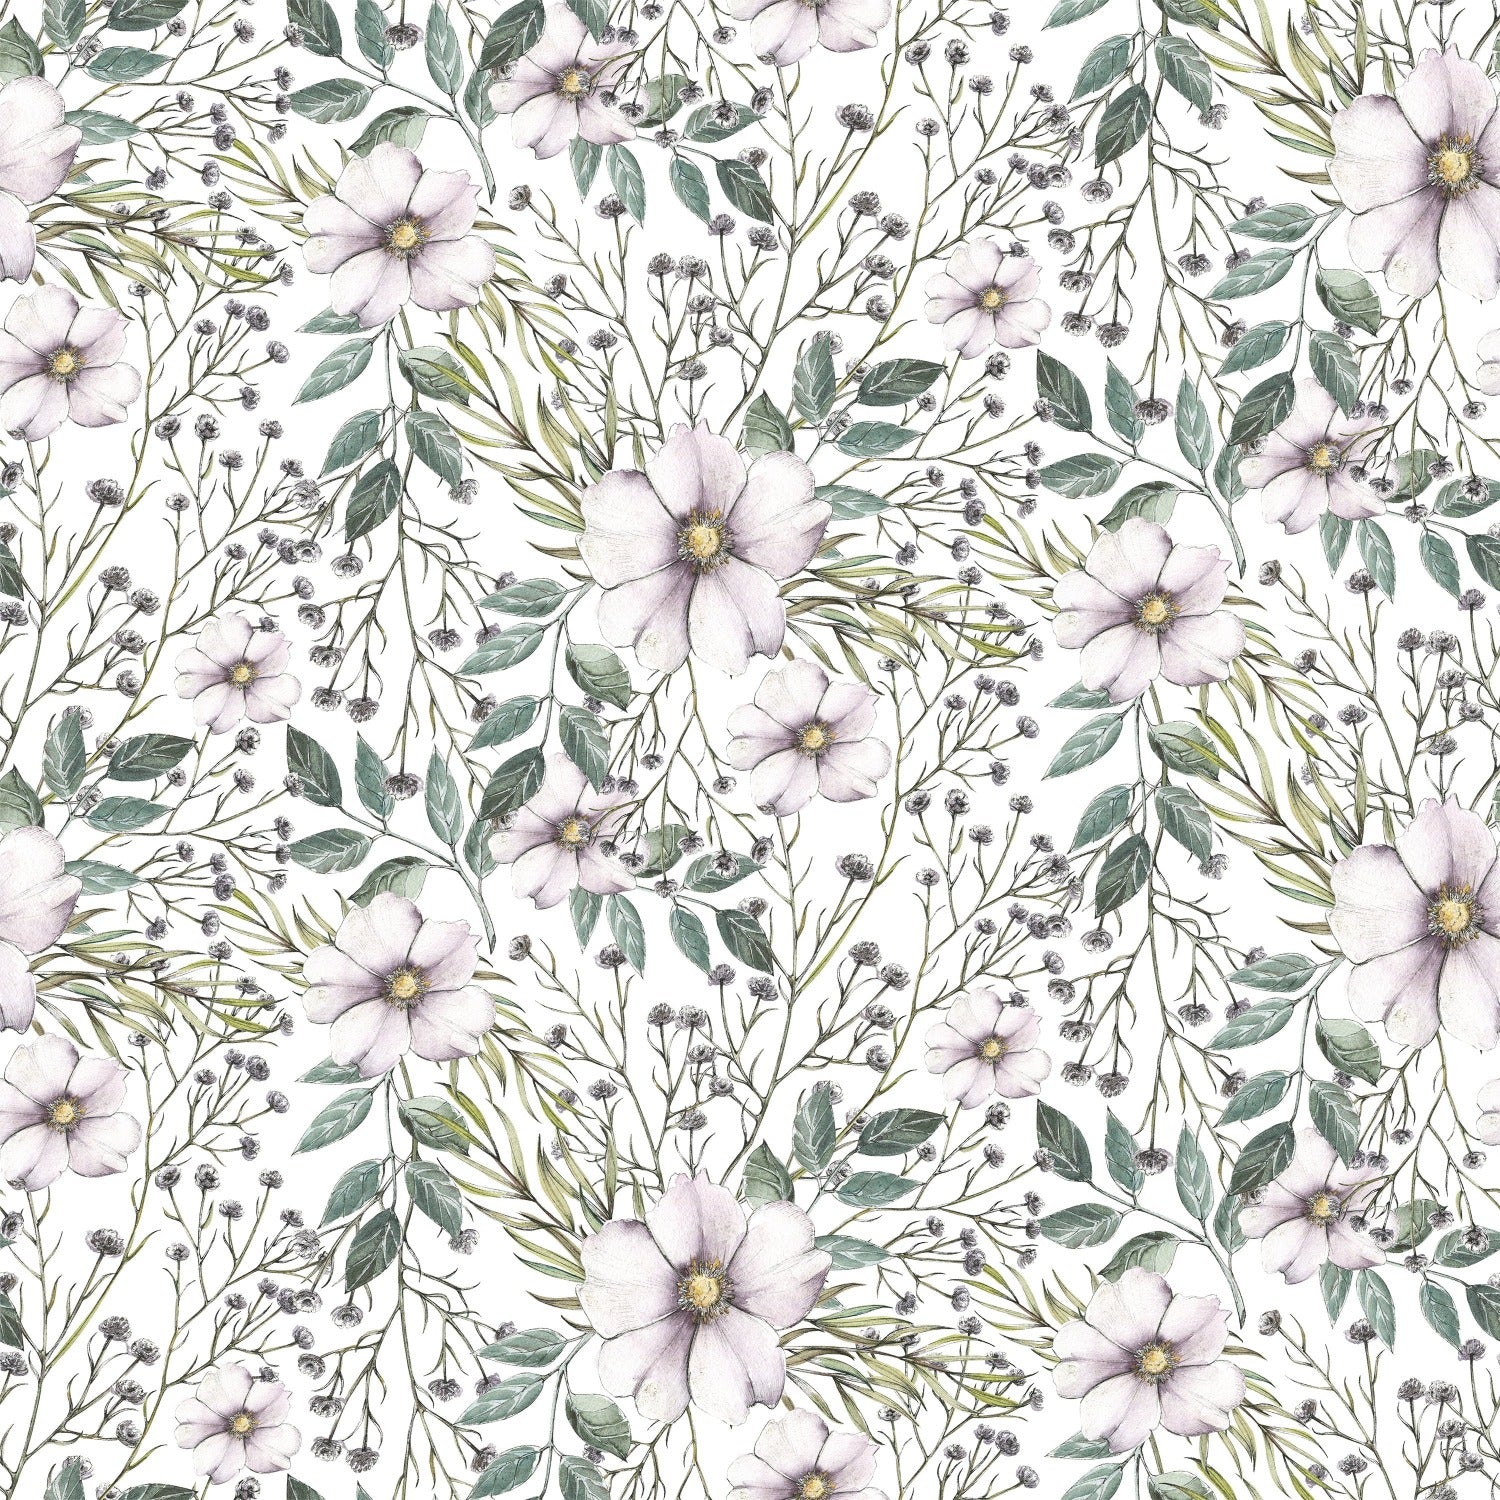 Close-up of the Botanical Wildflower Wallpaper II showcasing a detailed pattern of purple wildflowers and green foliage. The flowers are delicately painted with a watercolor effect, giving the wallpaper a soft, dreamy quality that adds a touch of artistic flair to any space.